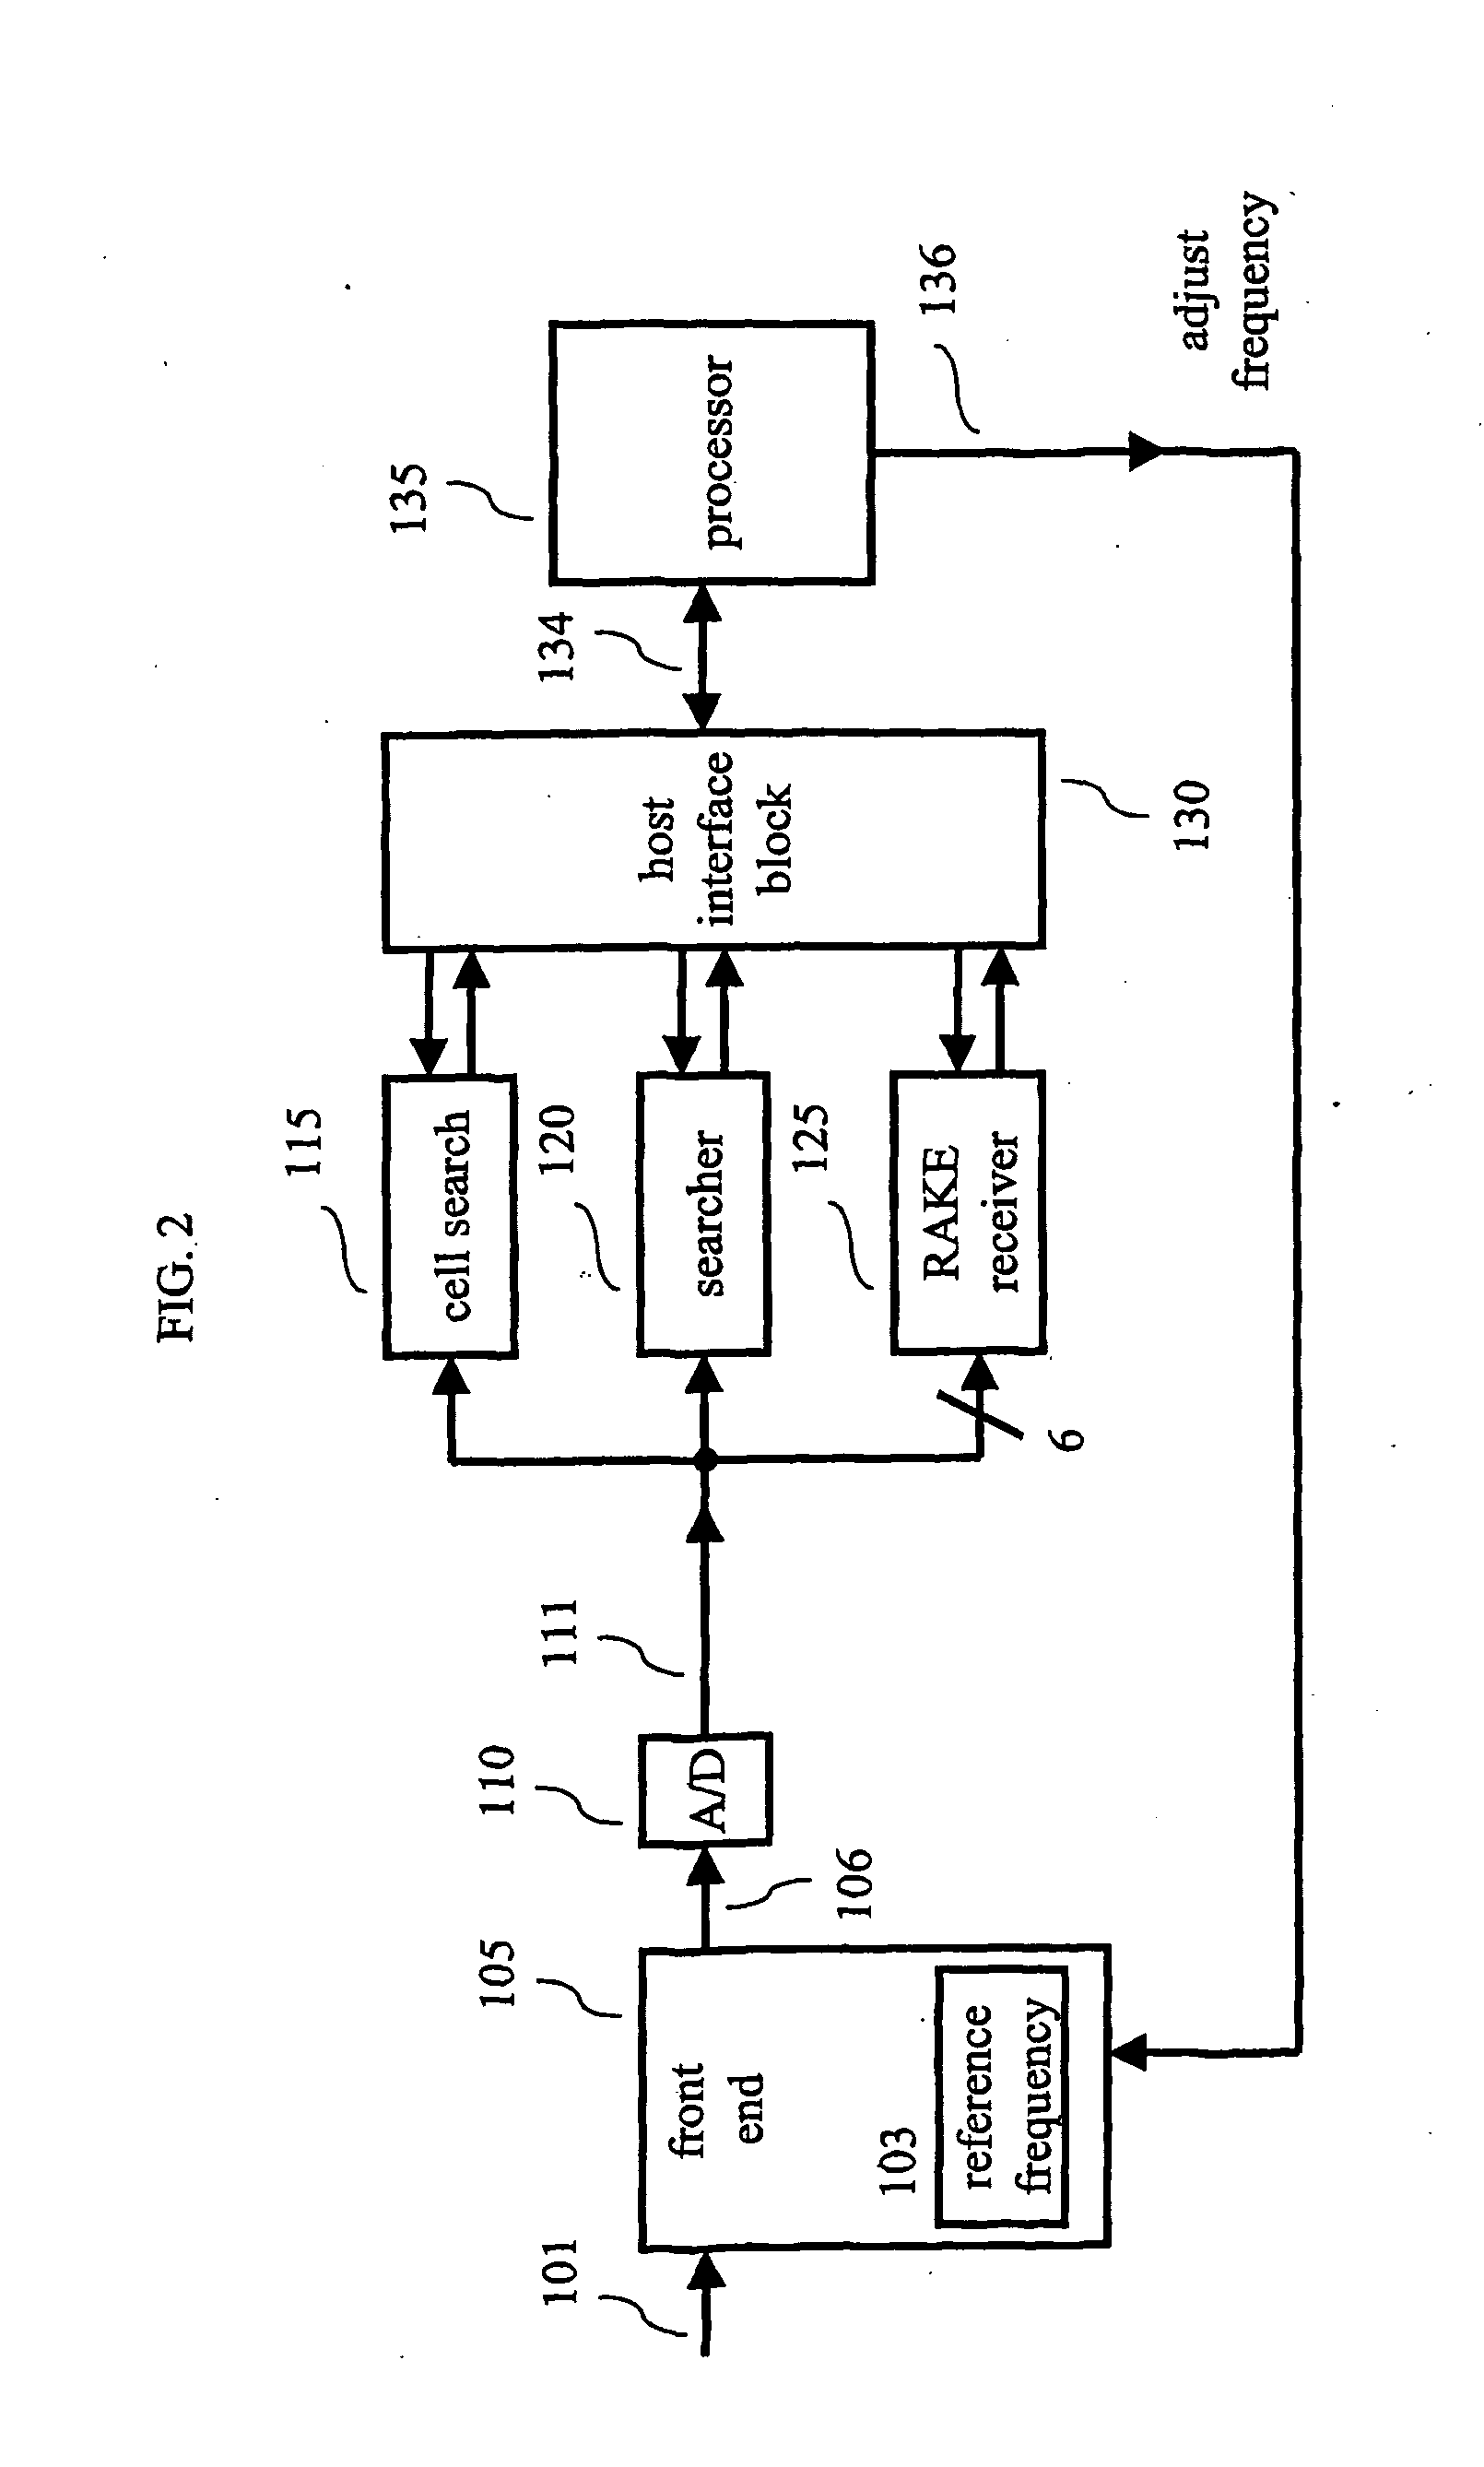 Frequency Synchronization During Cell Search in a Universal Mobile Telephone System Receiver